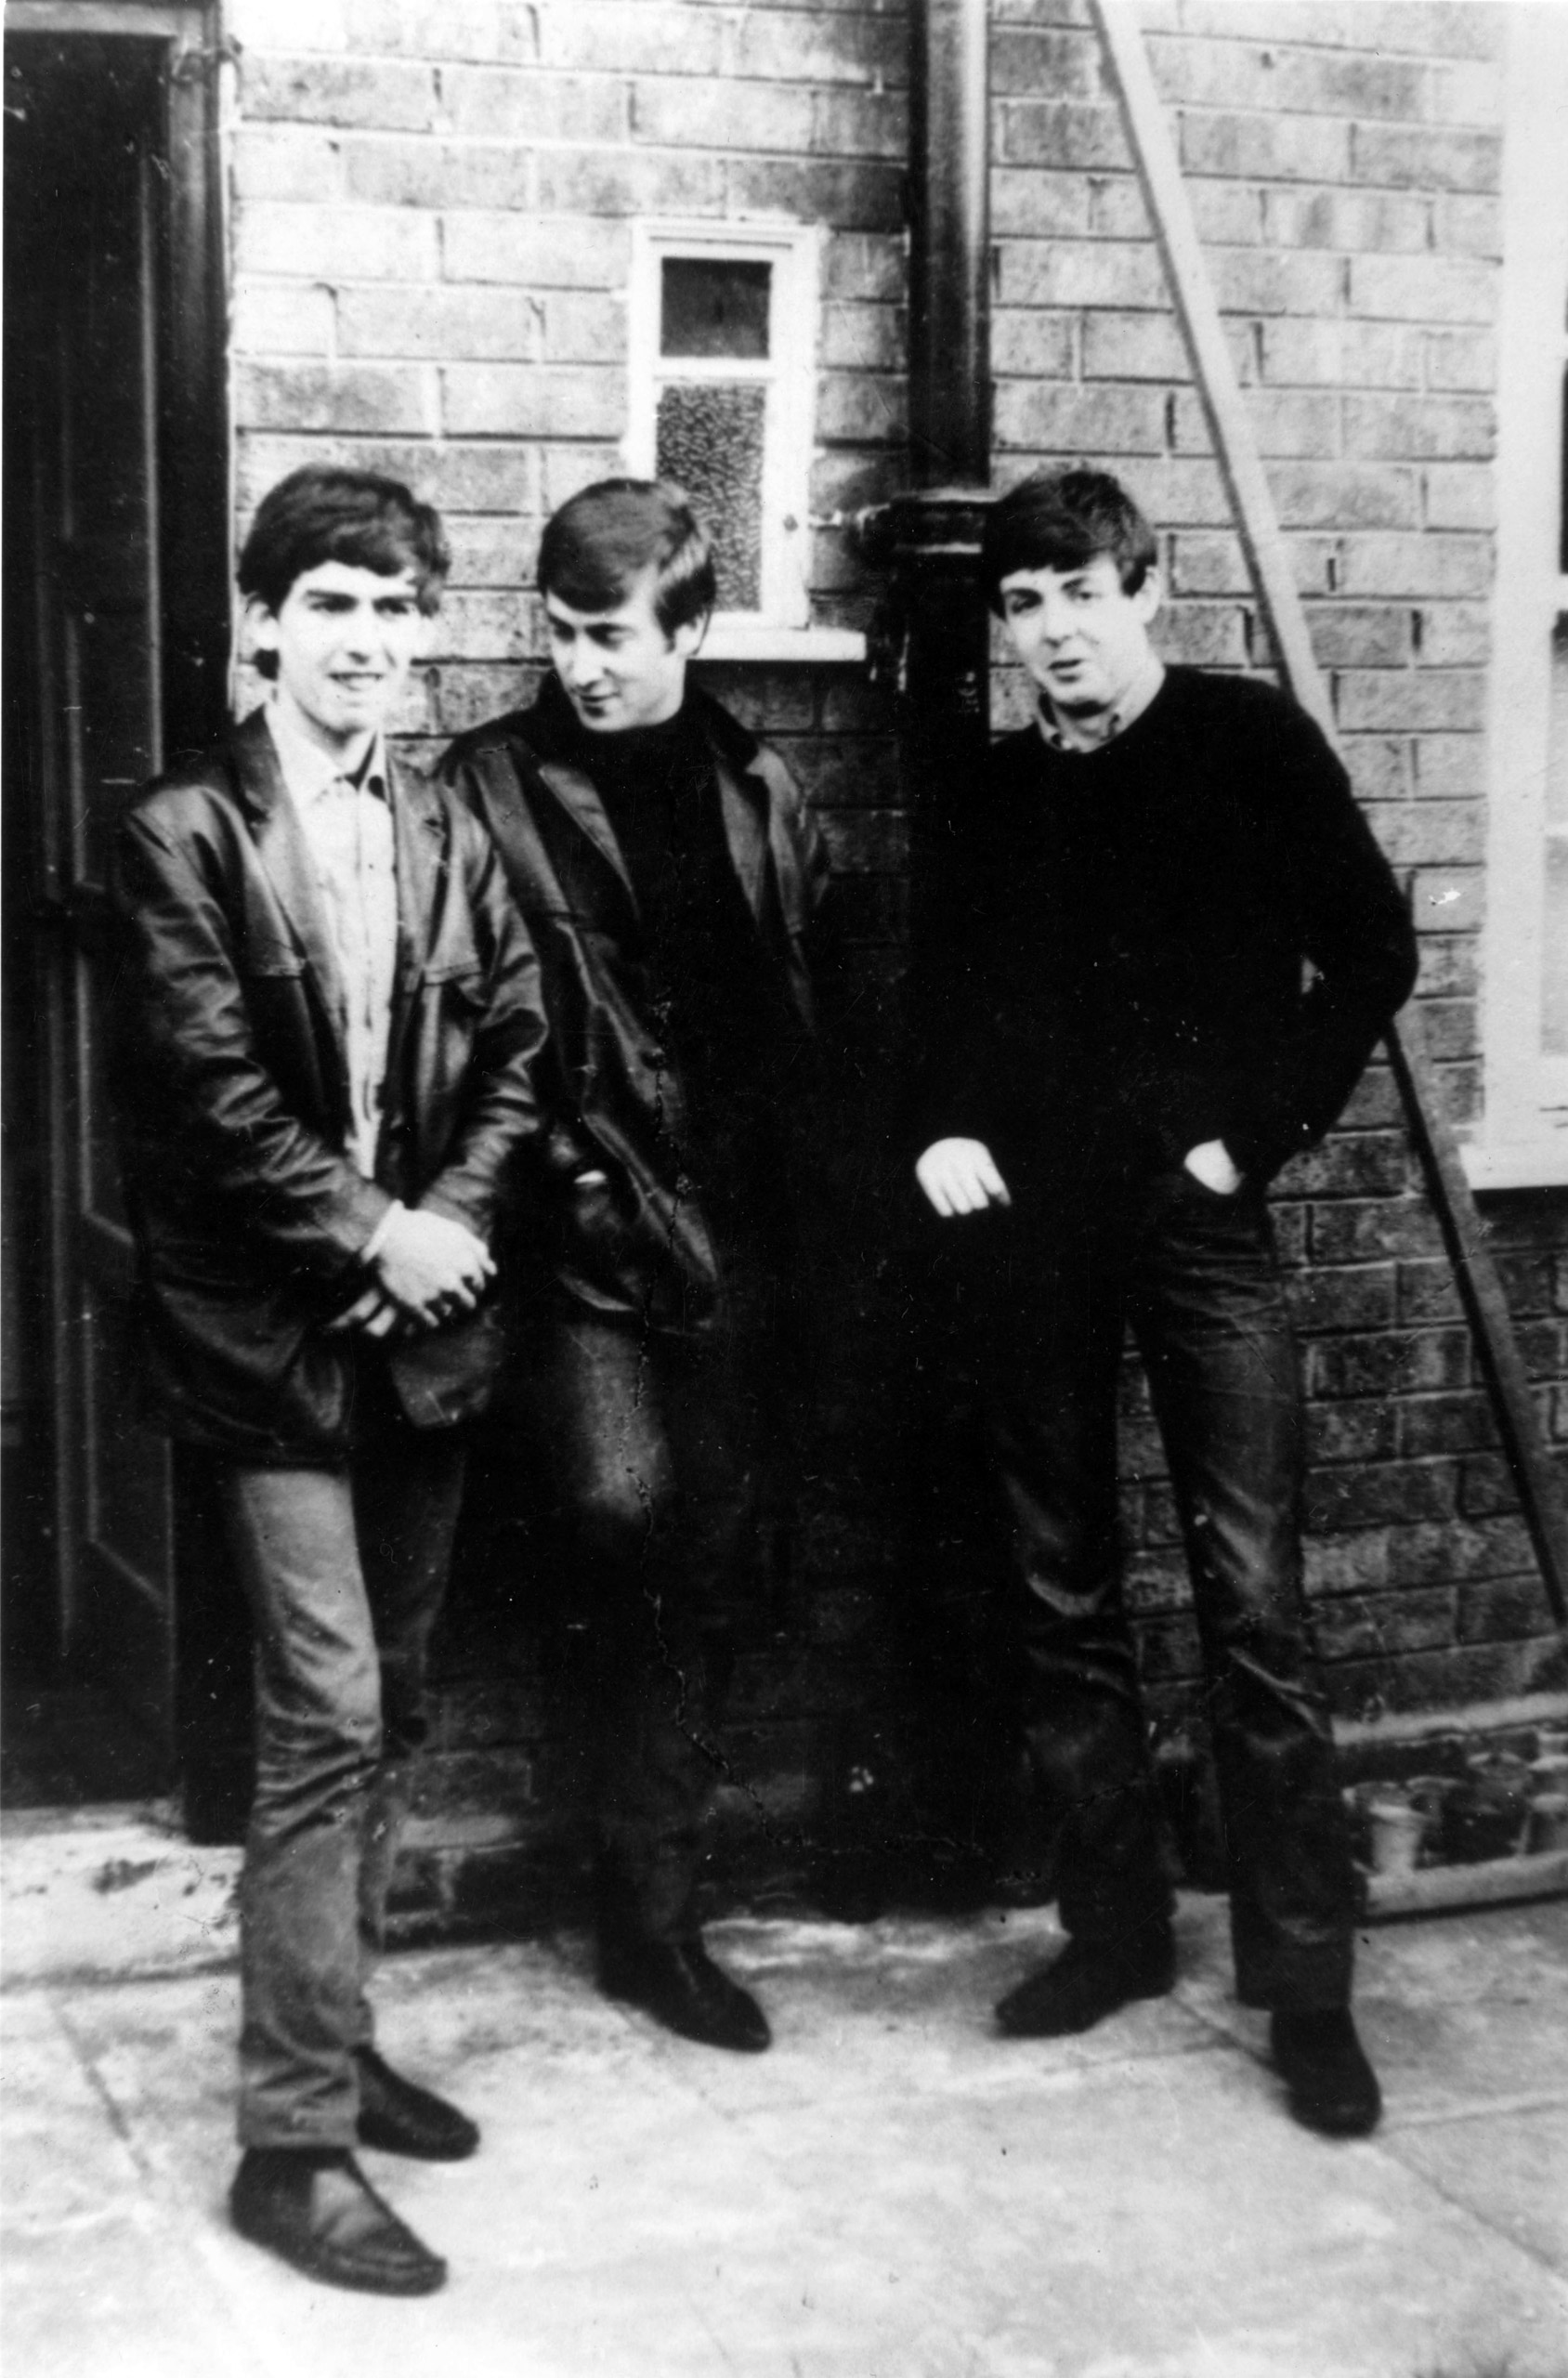 The Beatles standing outside Paul's Liverpool home (left to right) George Harrison (1943 - 2001), John Lennon (1940 - 1980), Paul McCartney. Ringo Starr was not to join the band for another two years. Circa 1960.